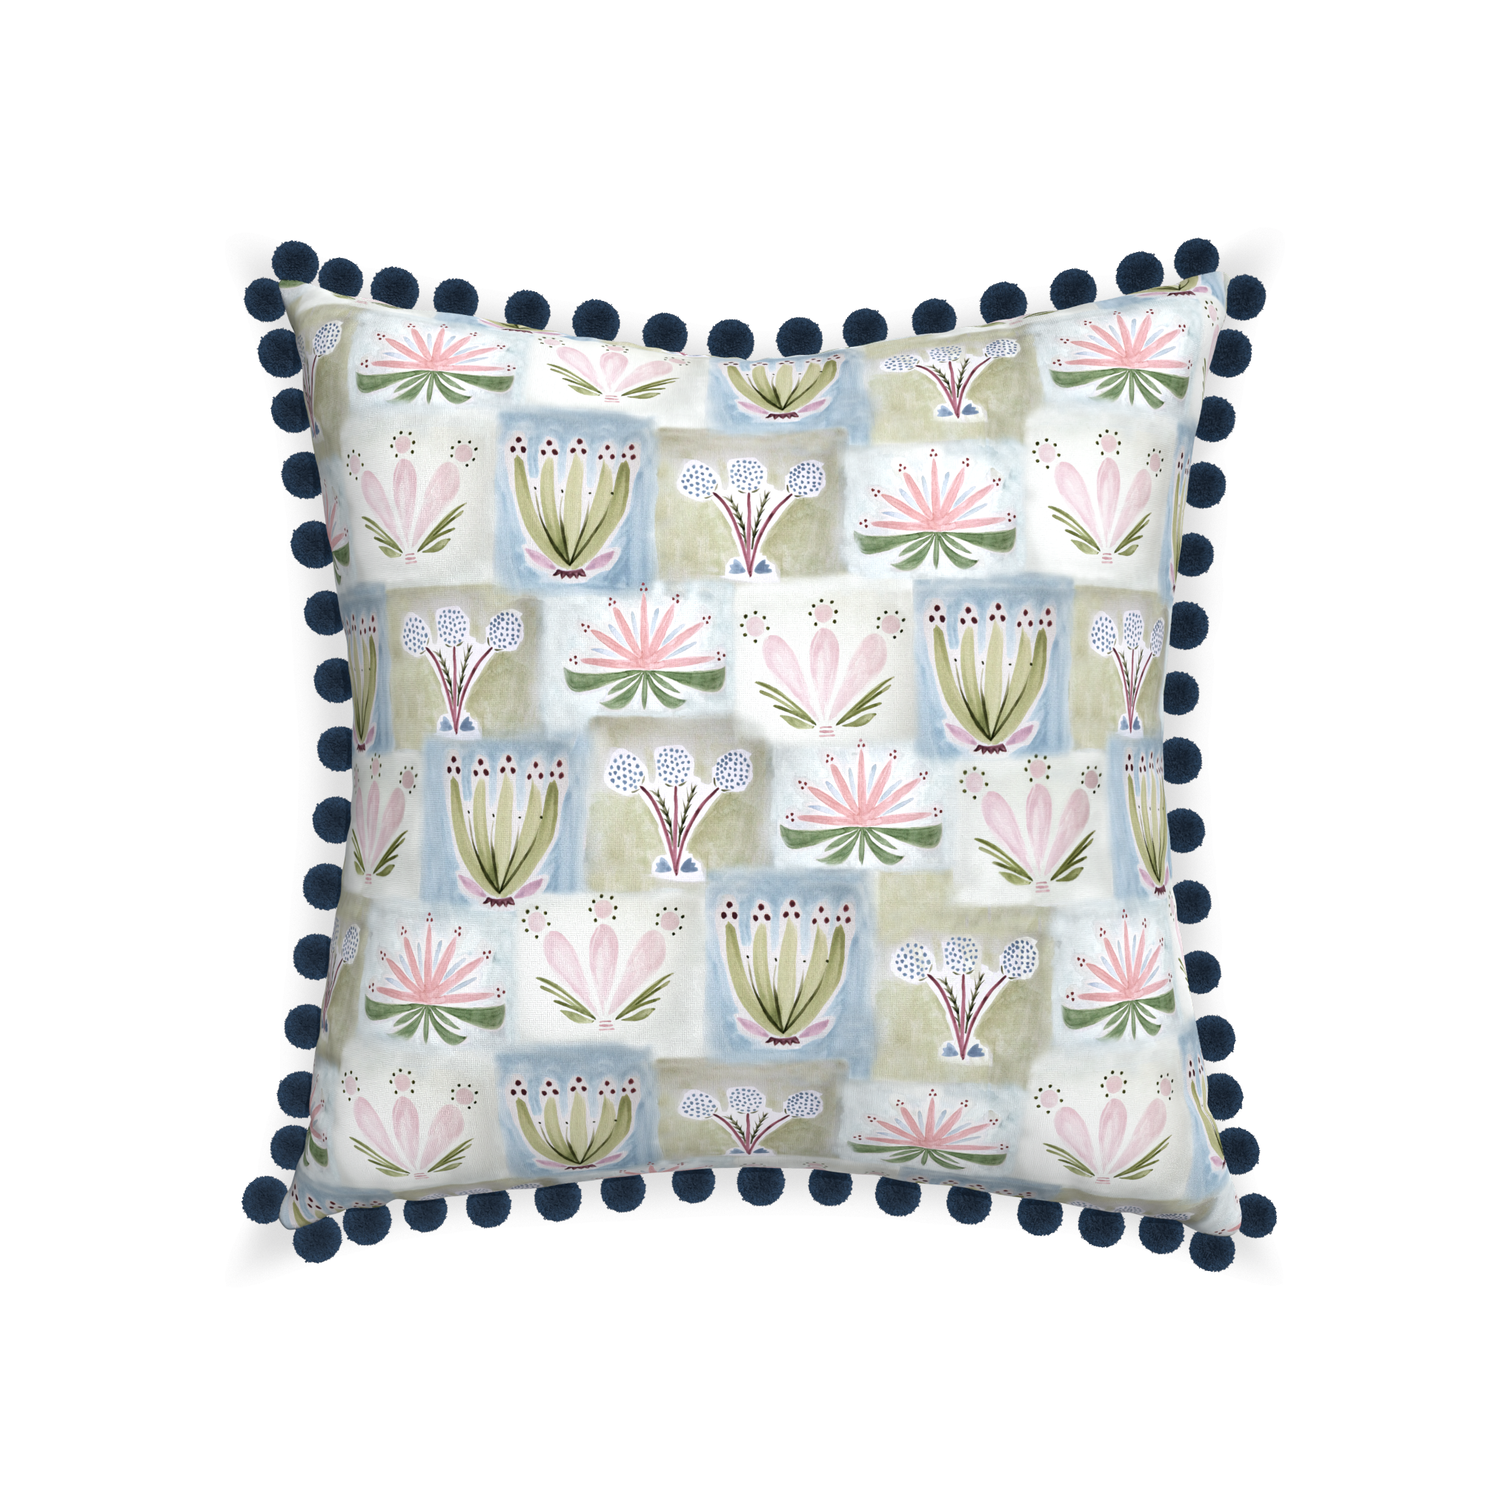 22-square harper custom hand-painted floralpillow with c on white background